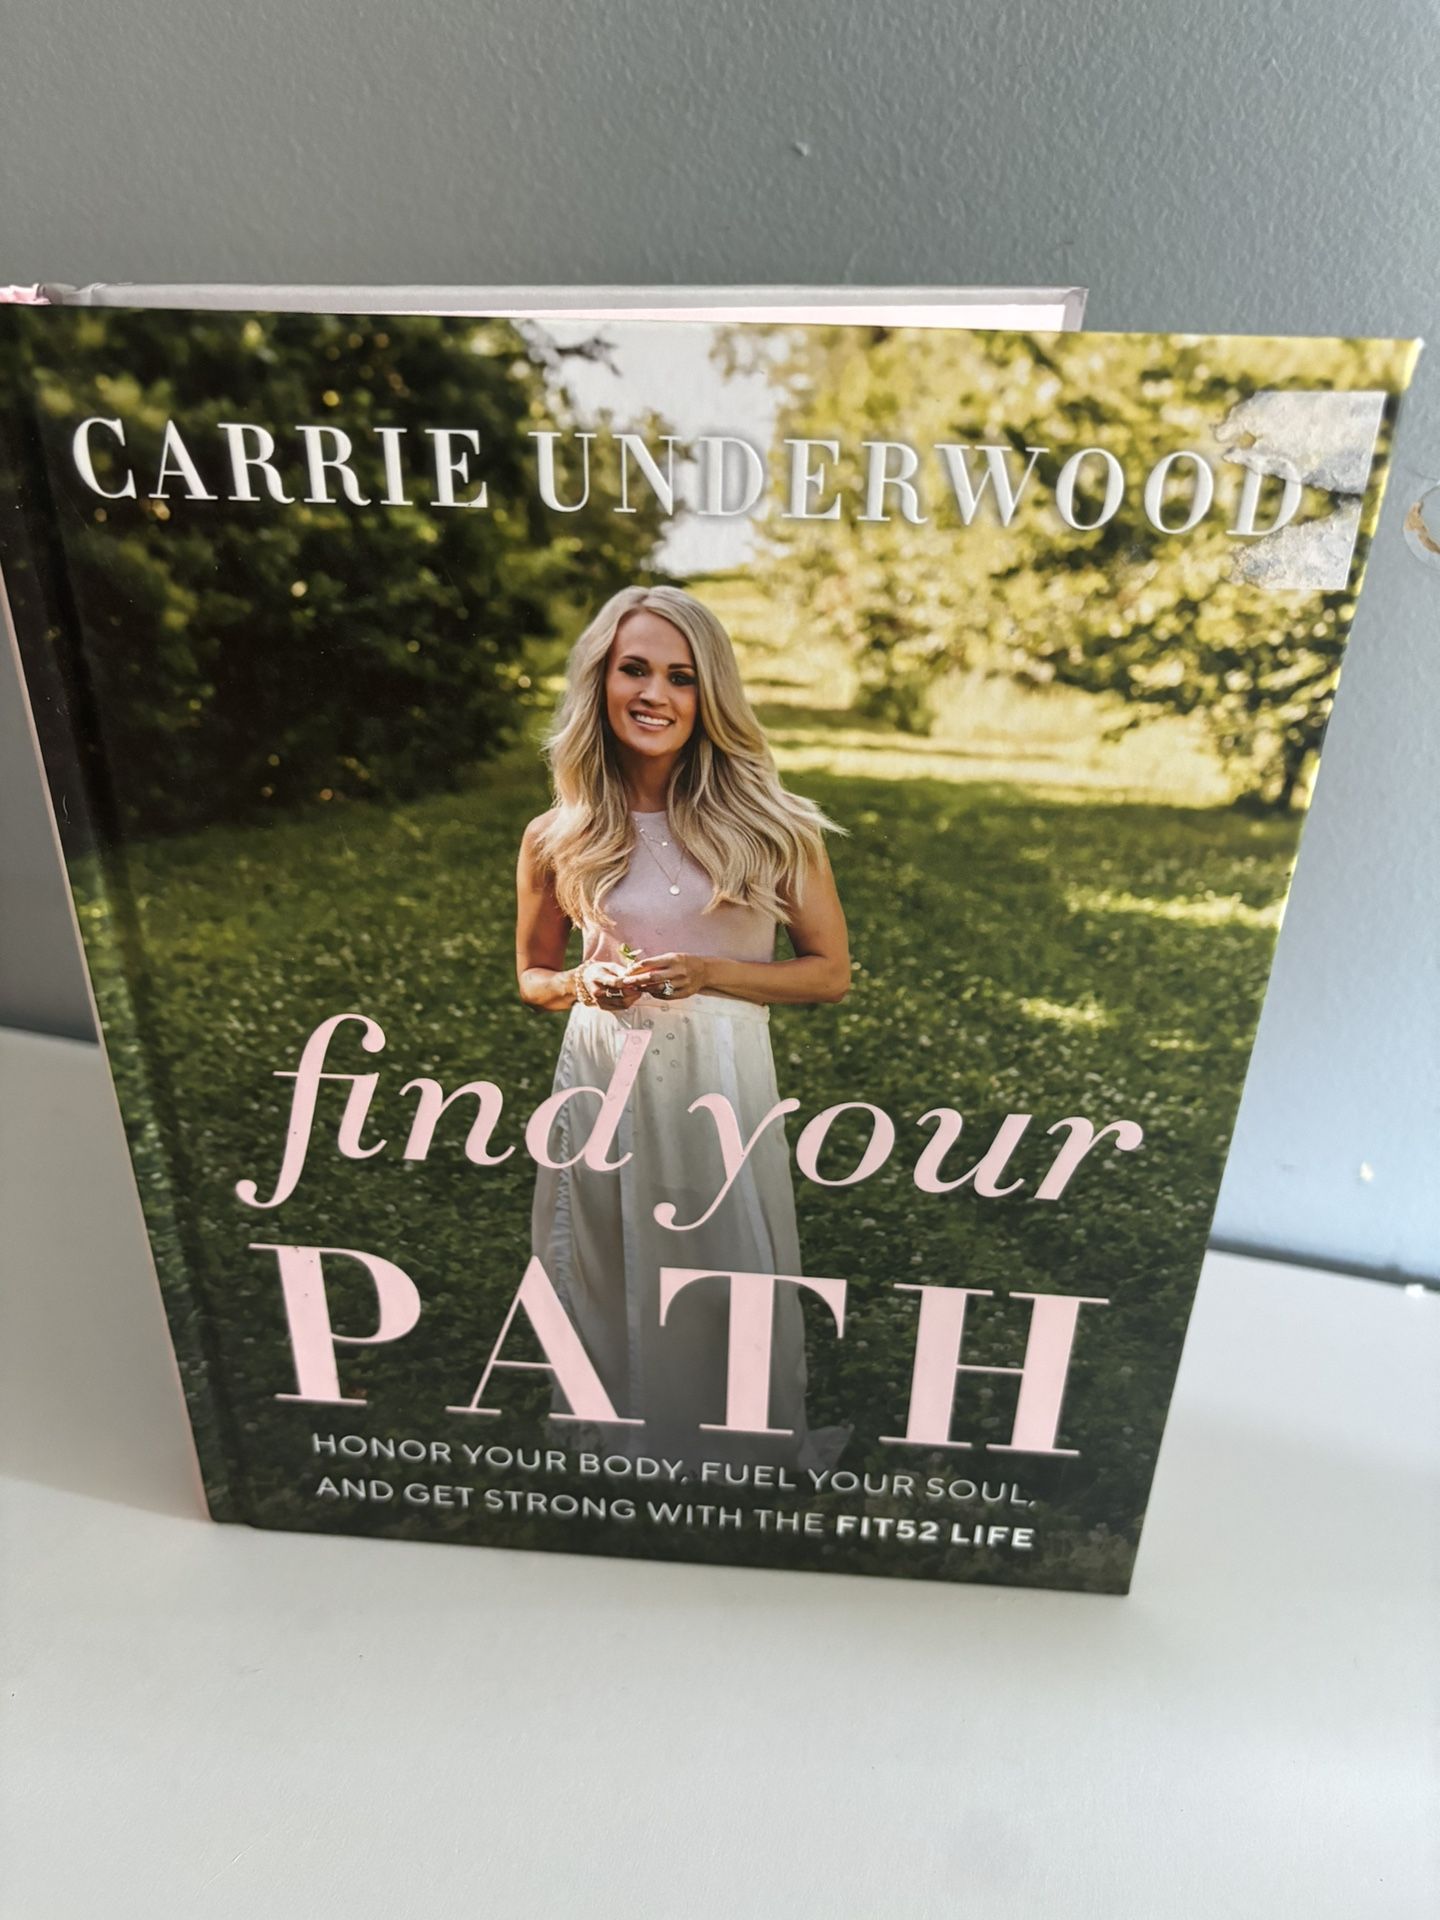 Carrie Underwood “find your PATH”